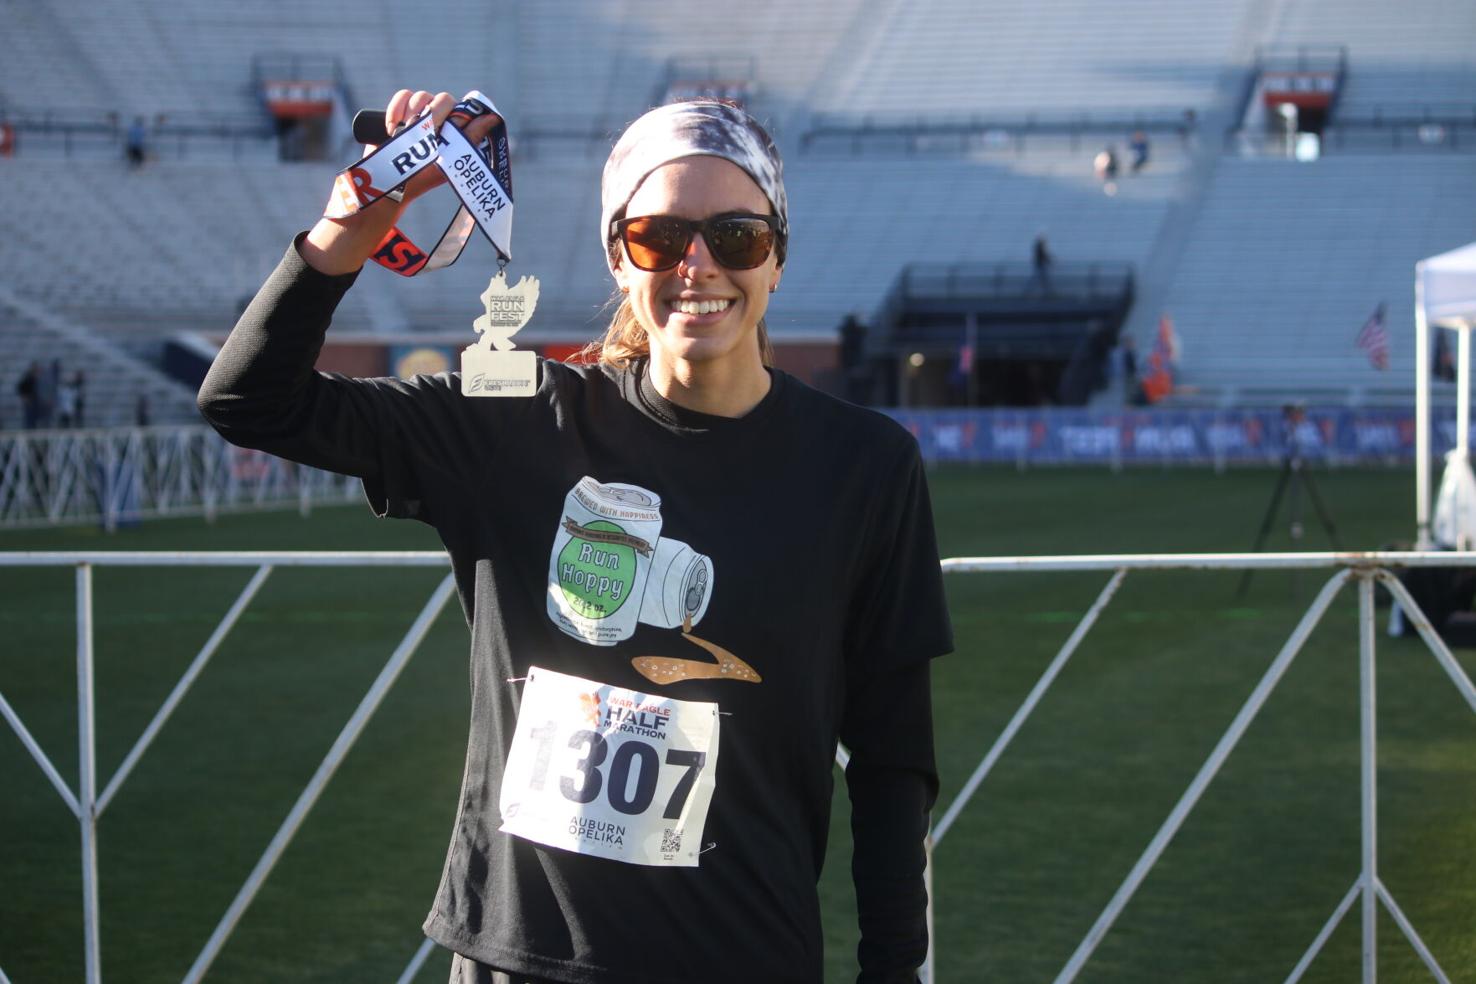 GALLERY Photos from the 2022 War Eagle Run Fest